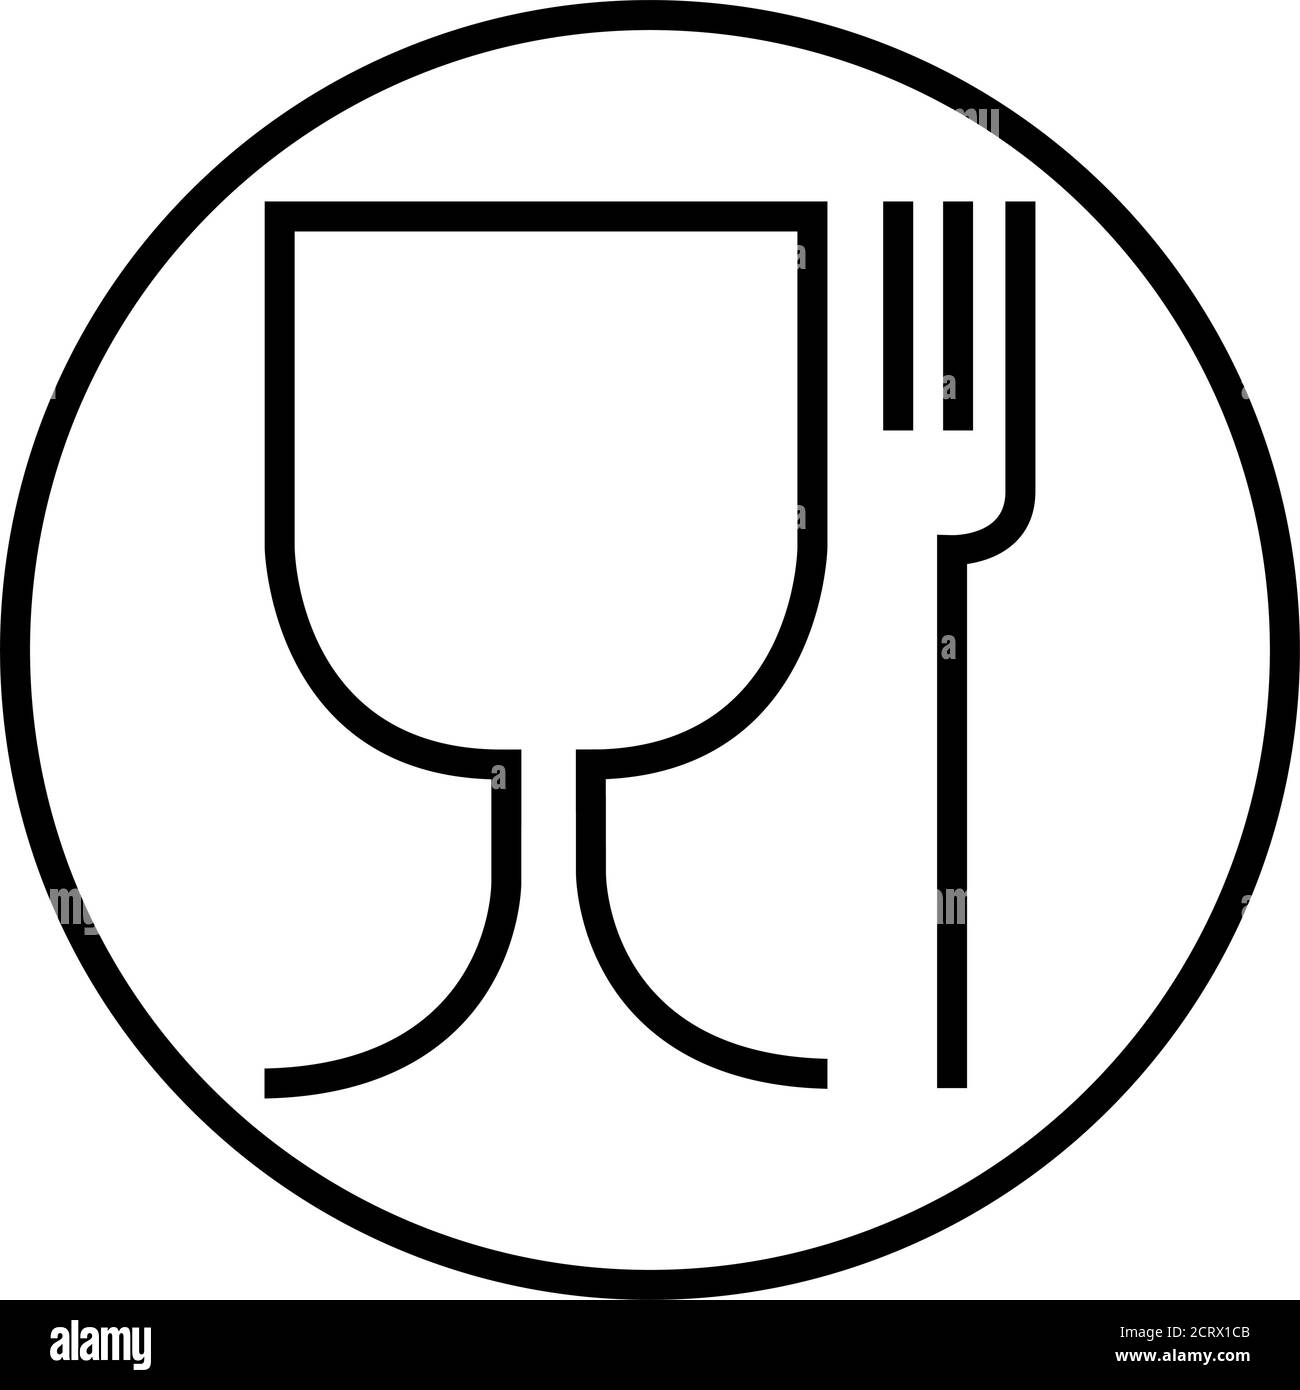 Food safe symbol. The international icon for food safe material are a wine glass and a fork symbol. Slim version in round . Stock Vector